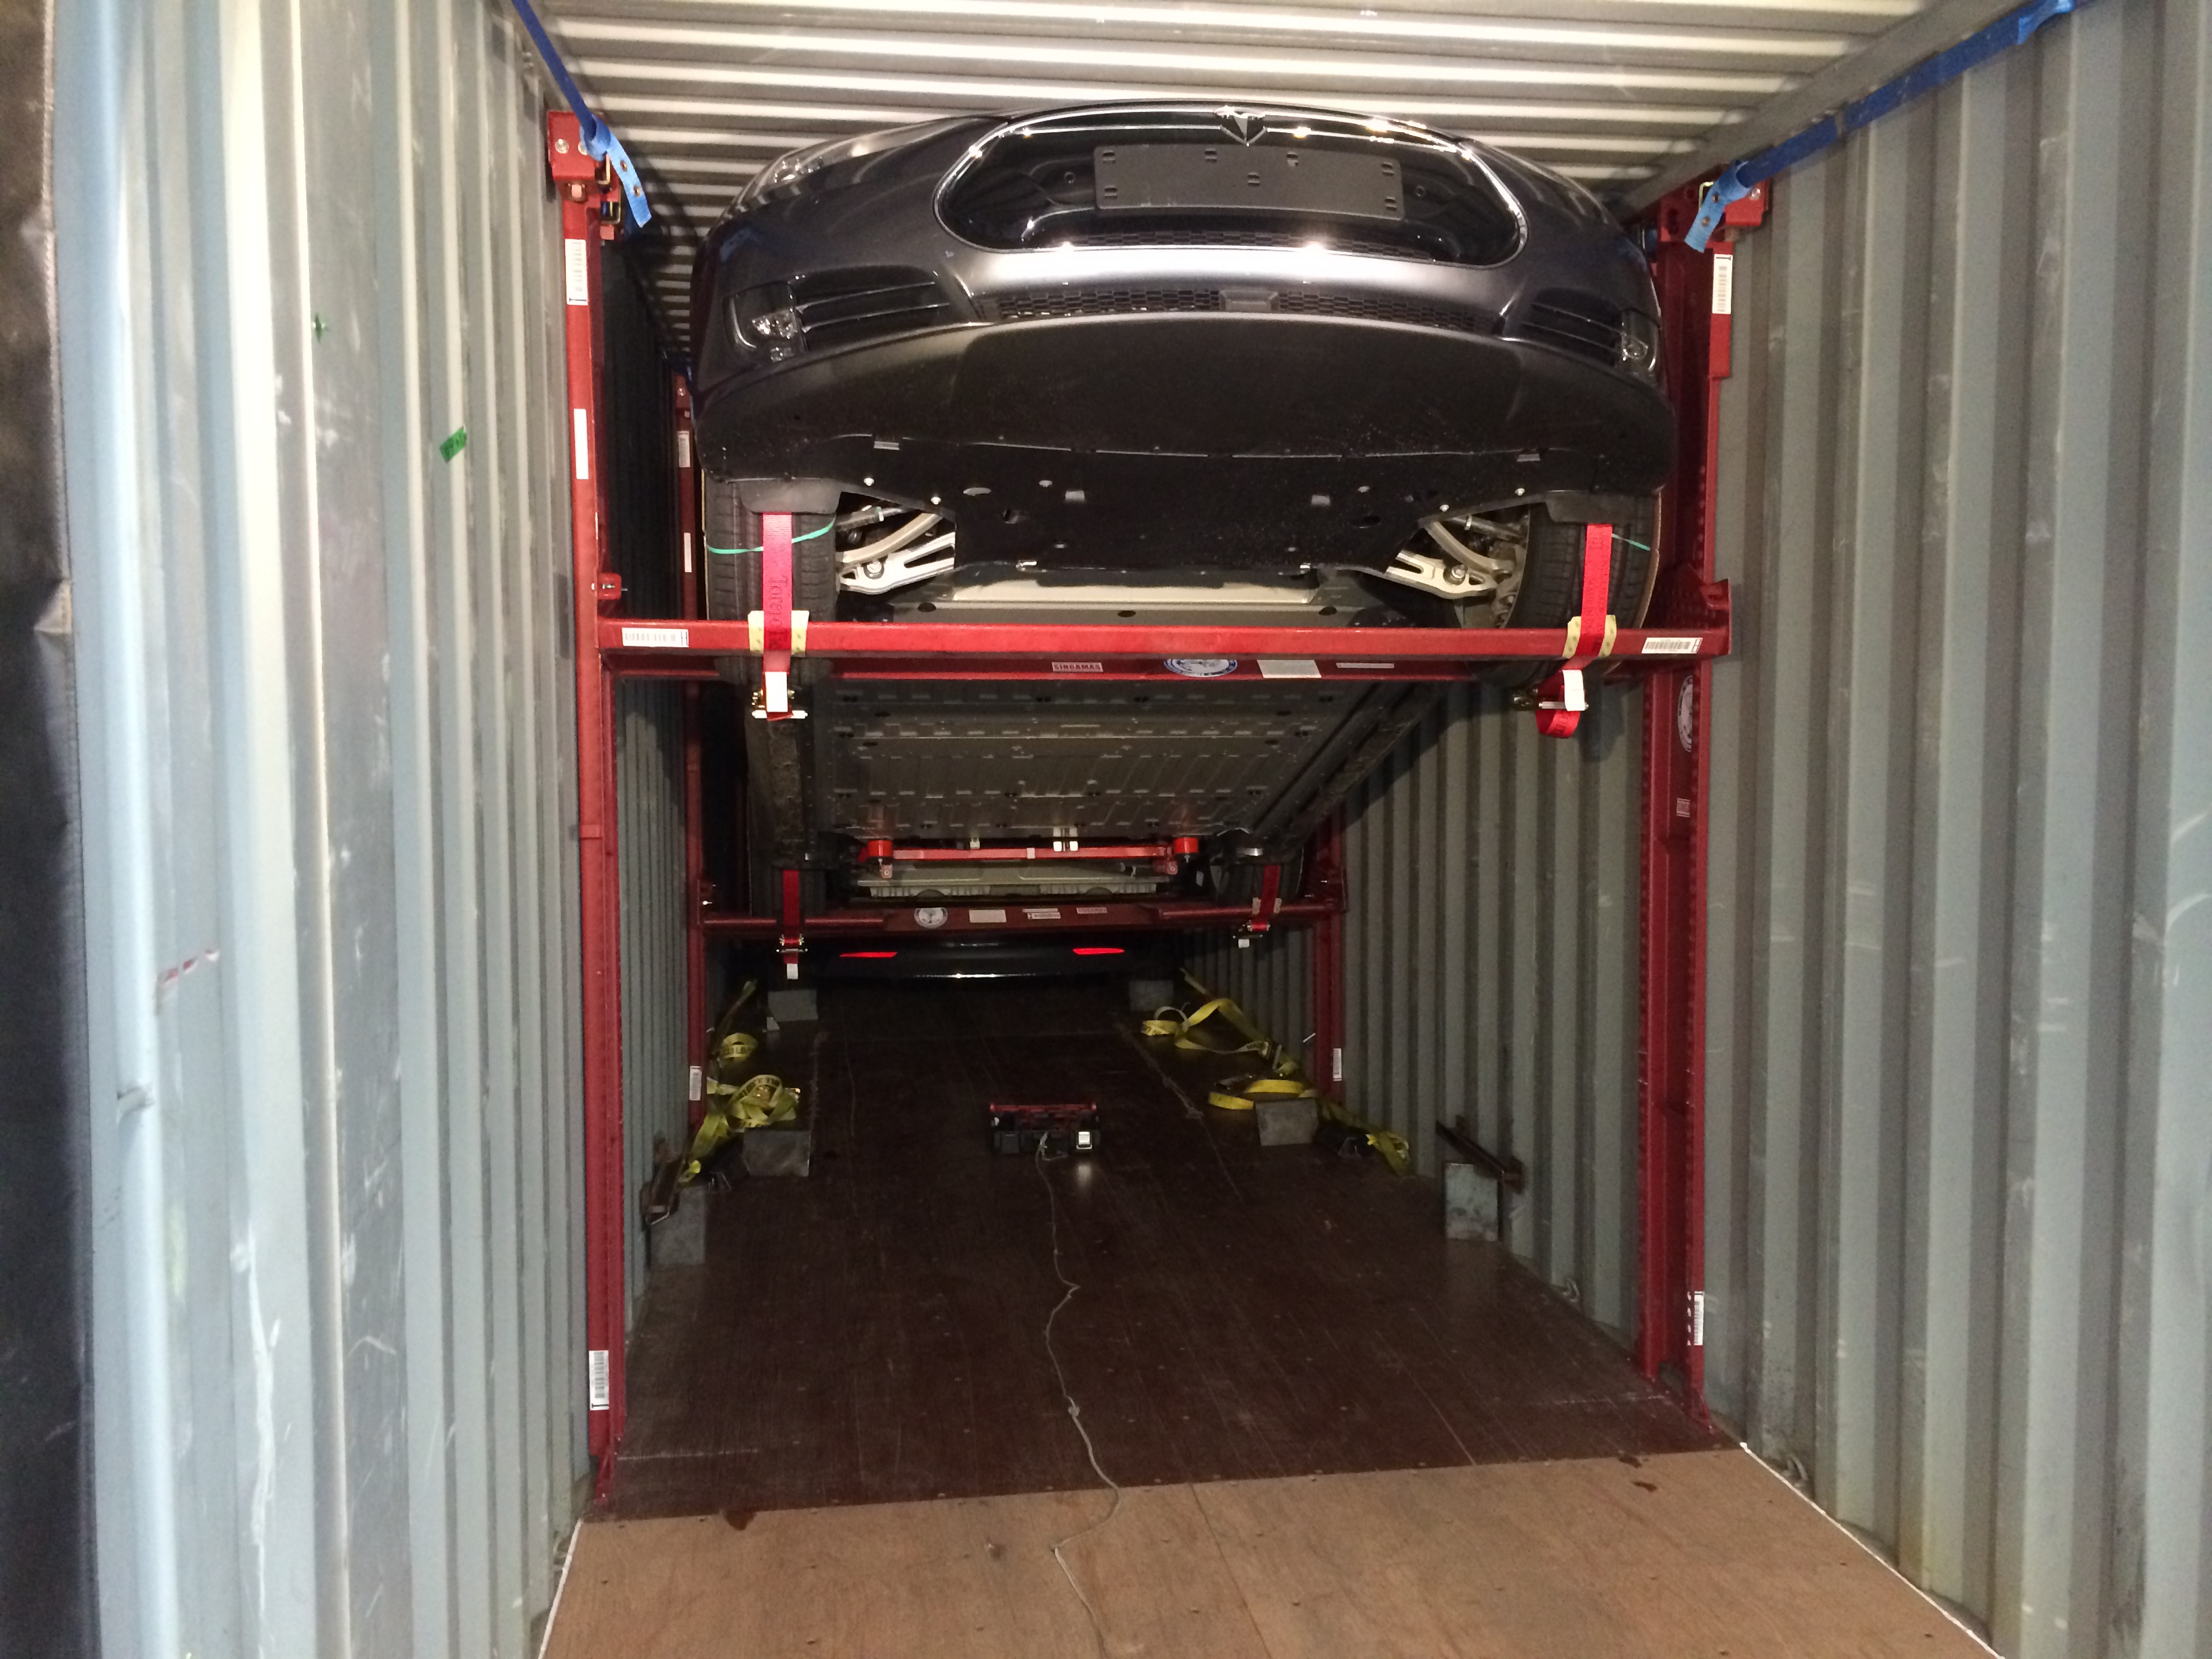 car being lifted on a racking system inside a shipping container to show how to ship UN 3171 classified battery powered vehicles